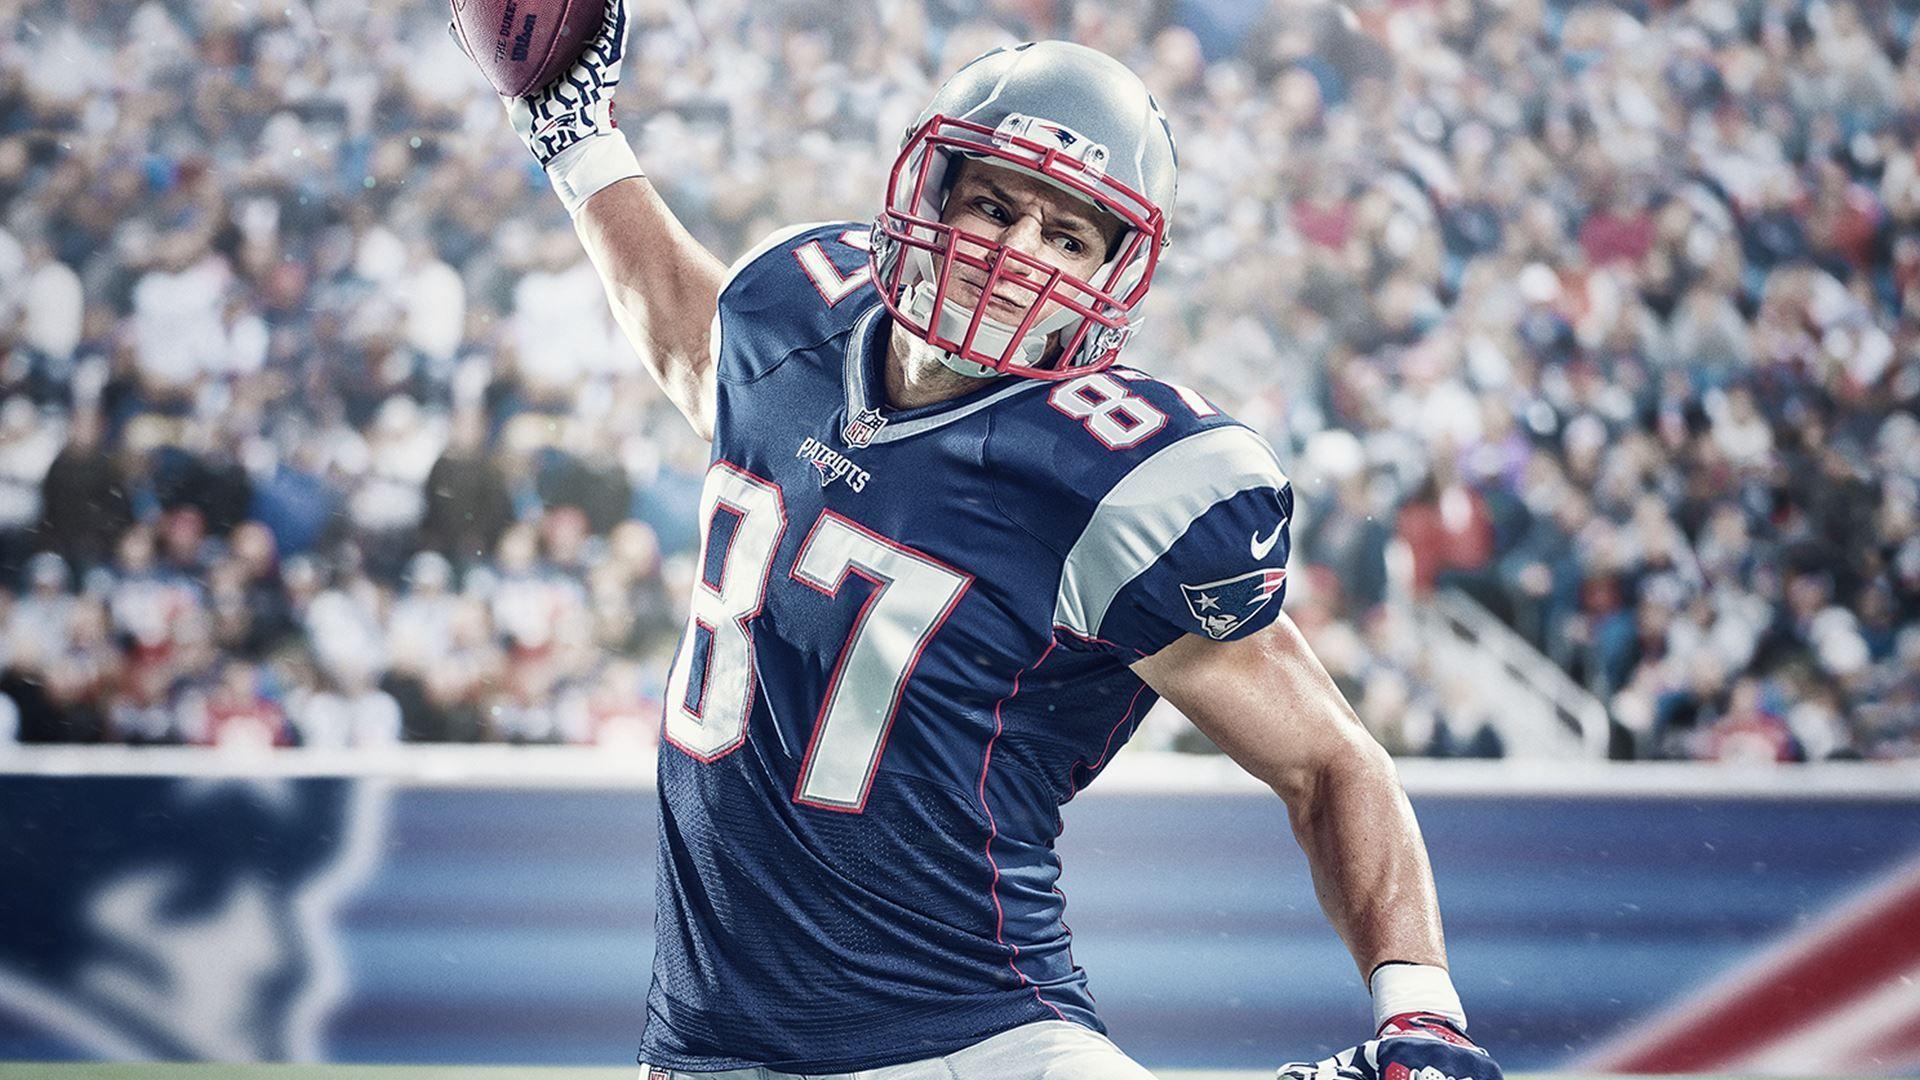 Madden nfl wallpapers